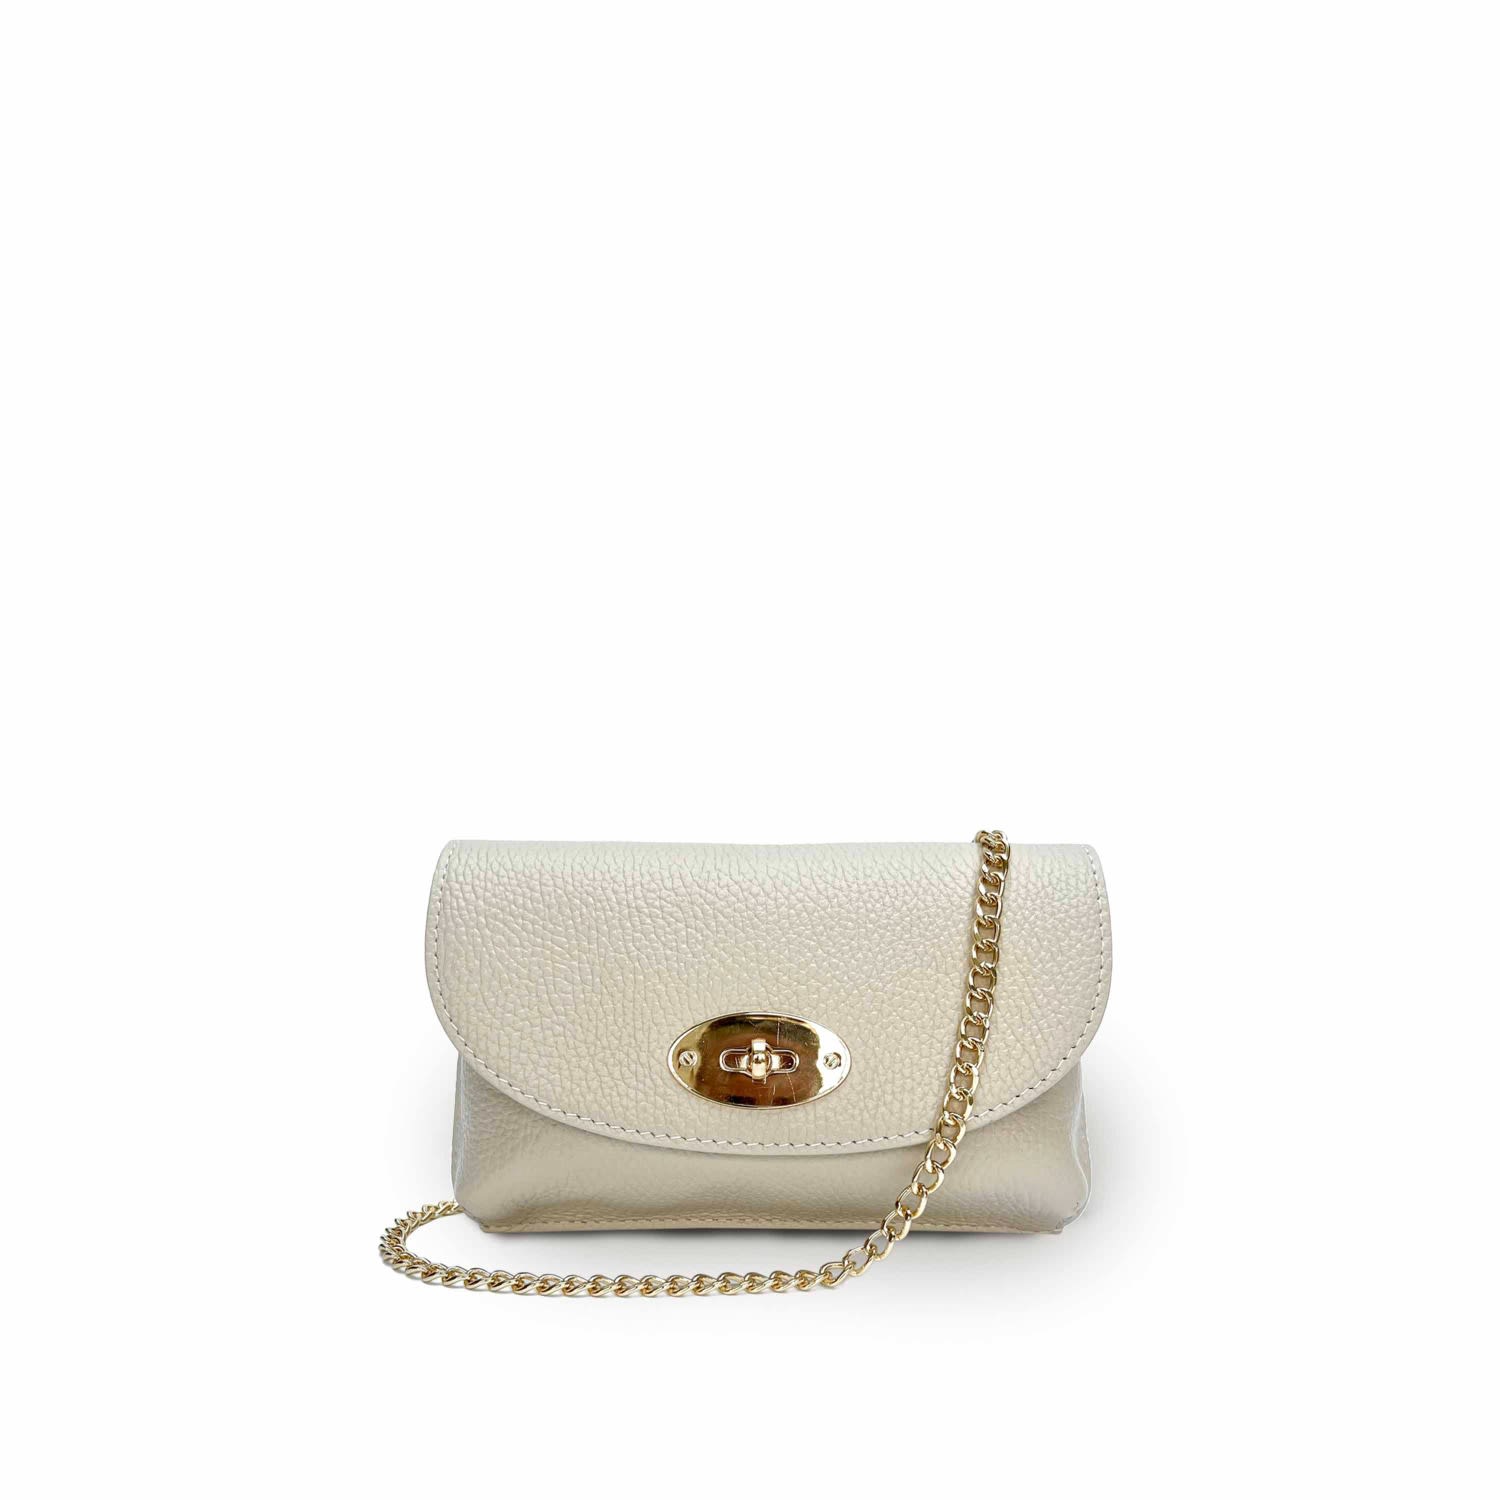 Apatchy London Women's Neutrals The Mila Stone Leather Phone Bag